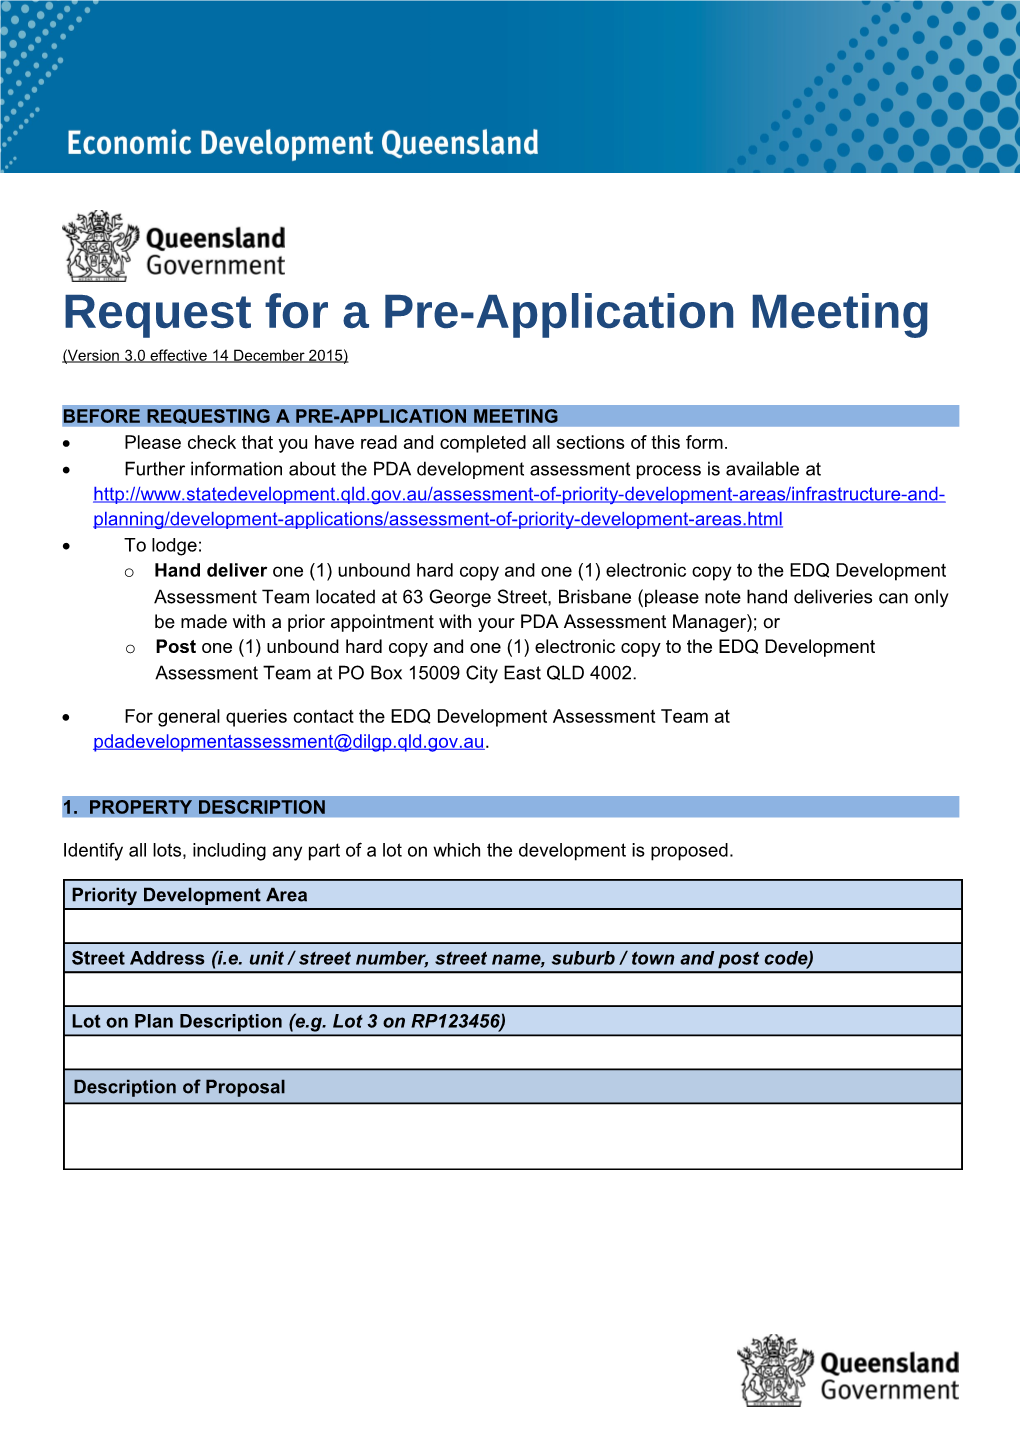 Request for a Pre-Application Meeting Form